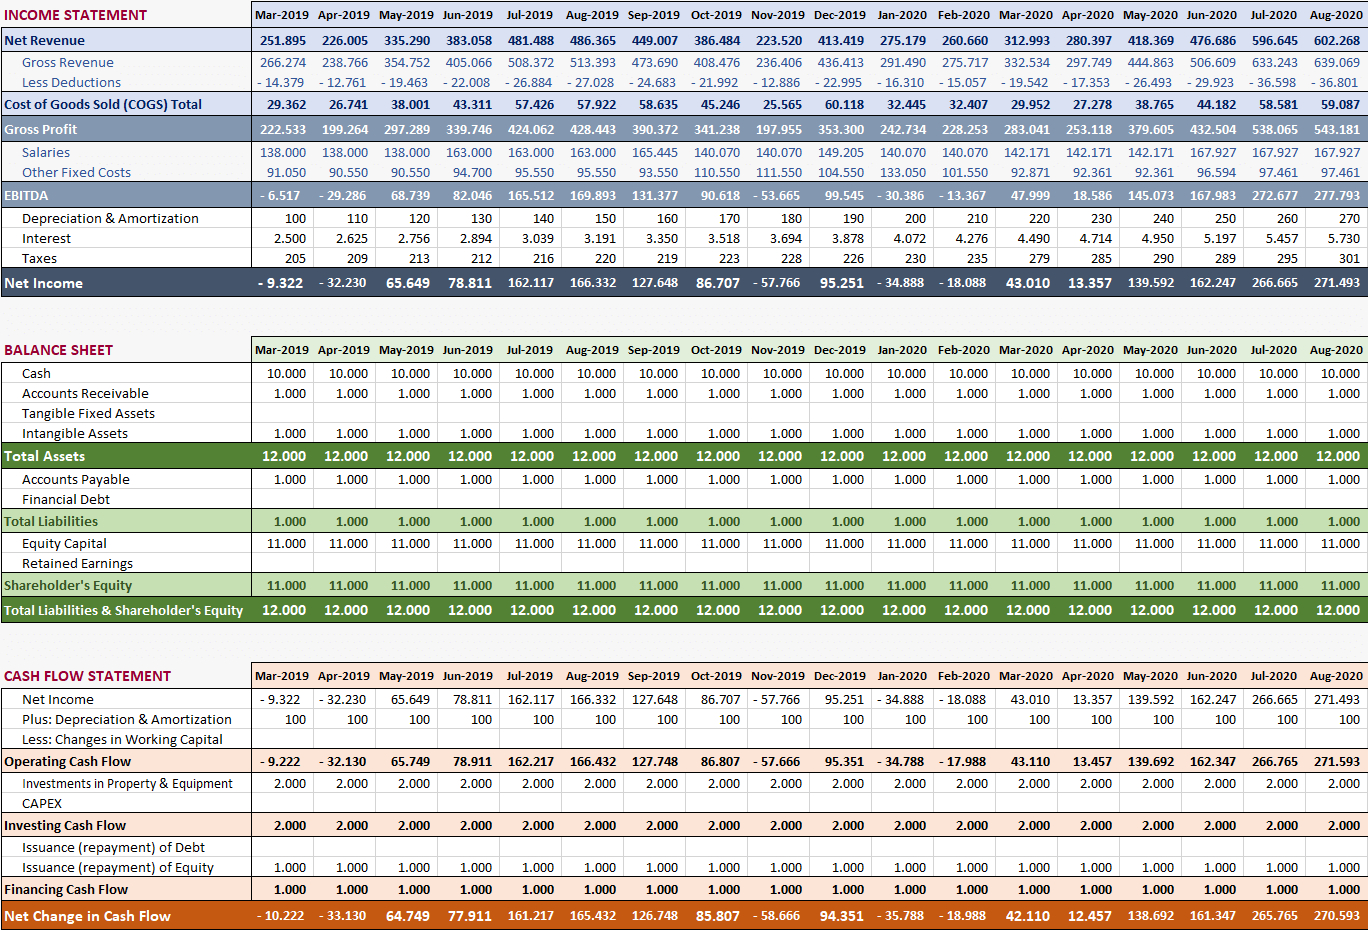 Hotel Financial Model With Financial Reporting Templates In Excel